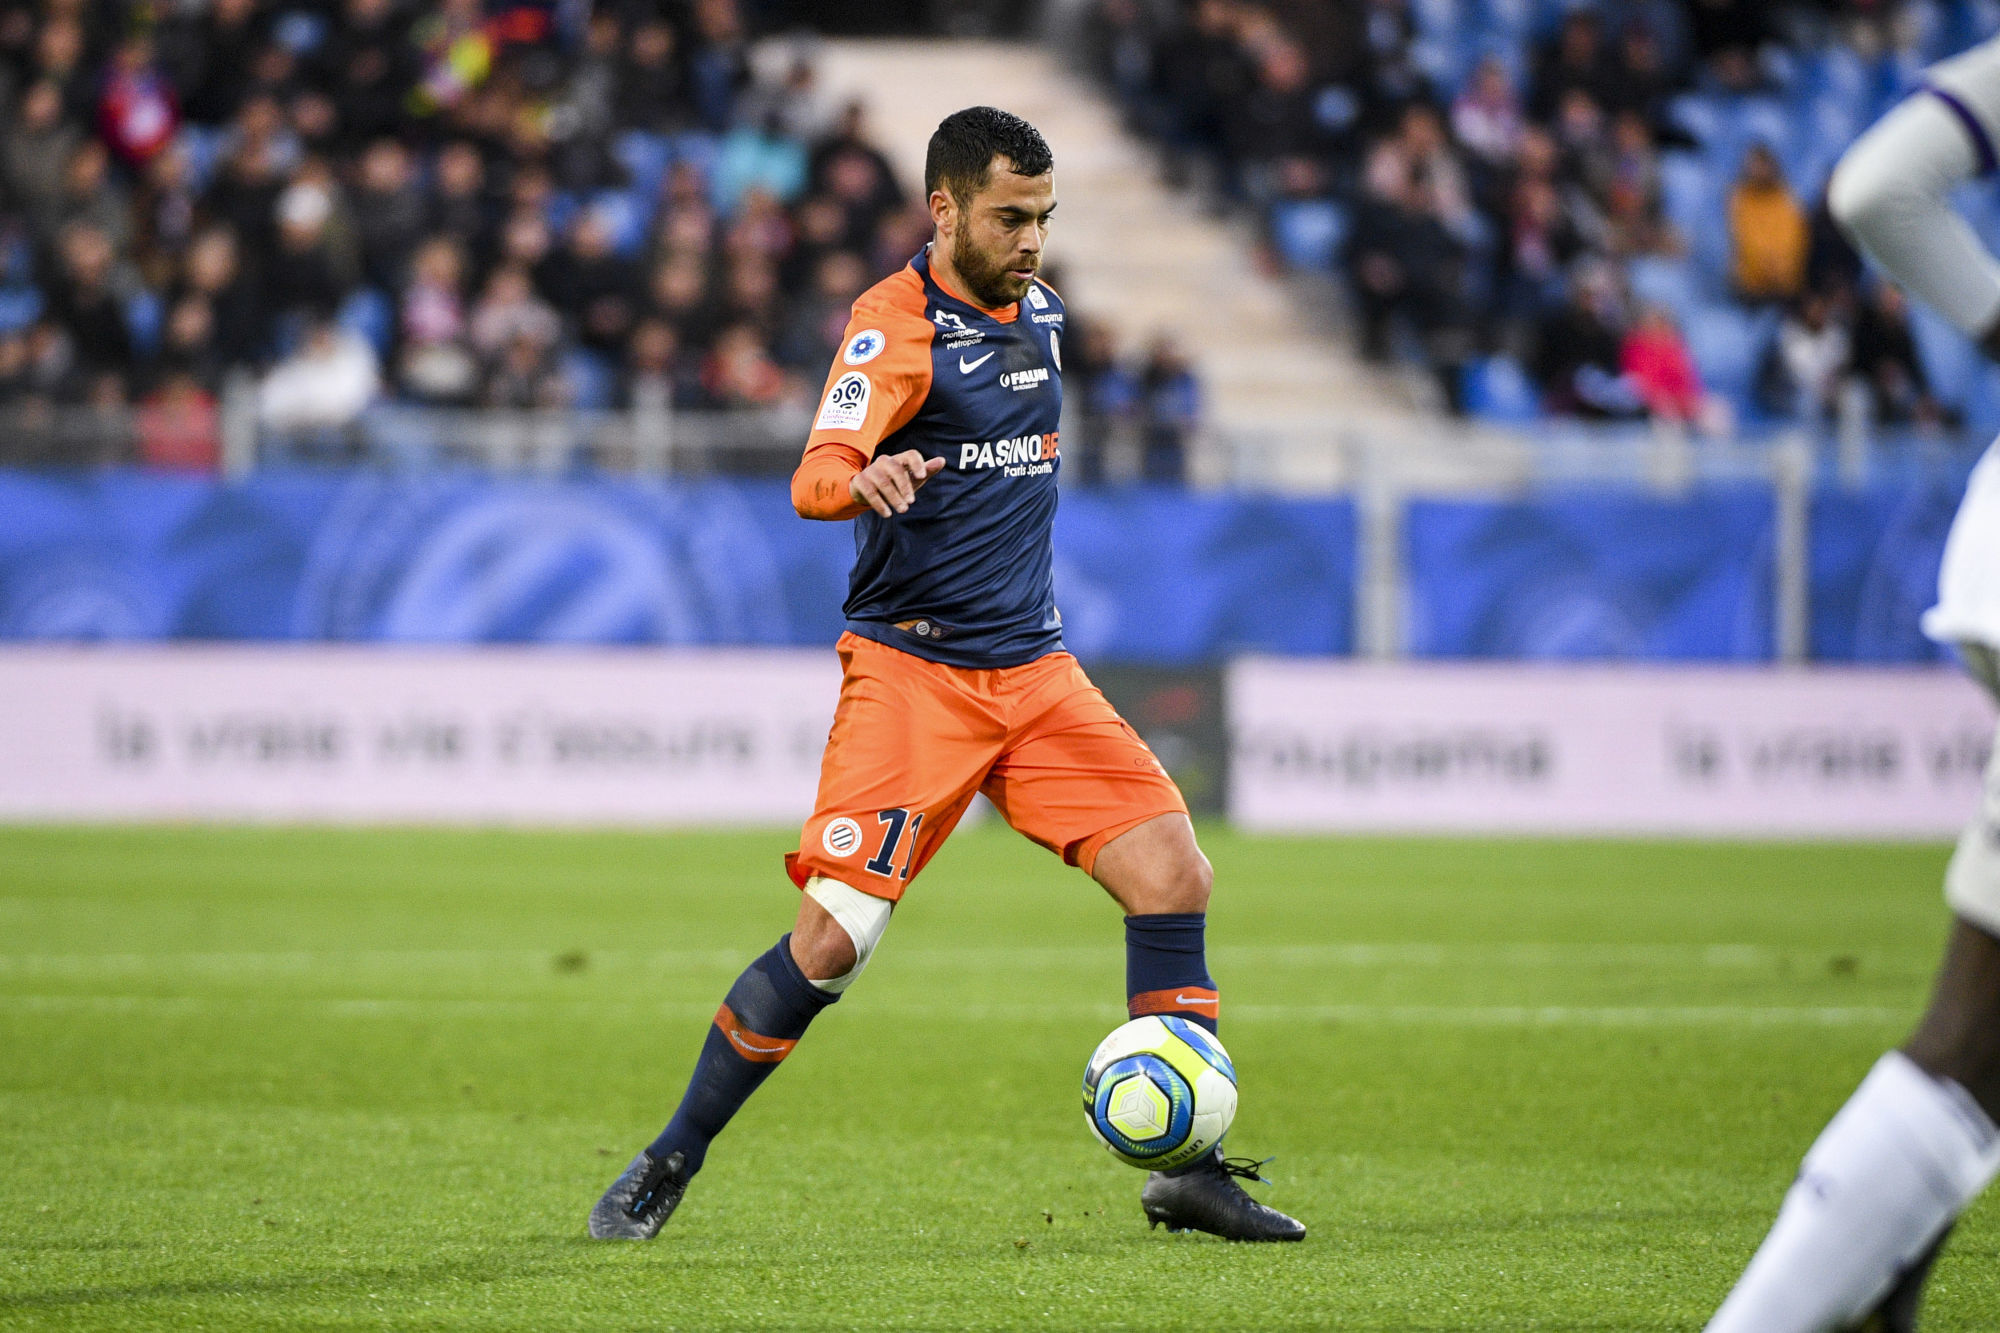 Teji SAVANIER of Montpellier during the Ligue 1 match between Montpellier and Toulouse at La Mosson on November 10, 2019 in Montpellier, France. (Photo by Aude Alcover/Icon Sport) - Teji SAVANIER - Stade de la Mosson - Montpellier (France)